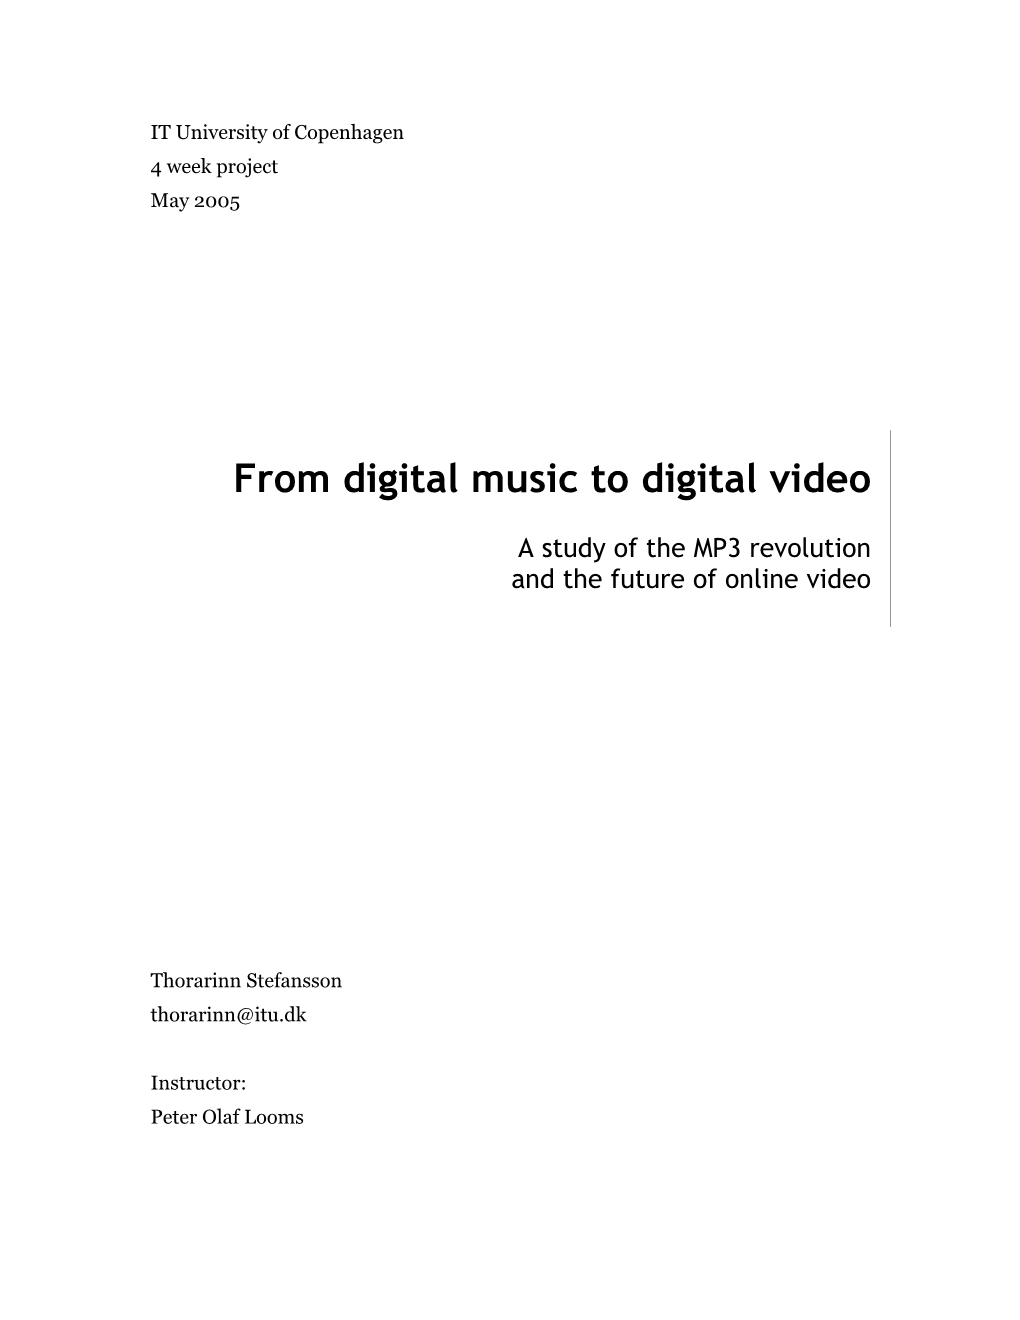 From Digital Music to Digital Video